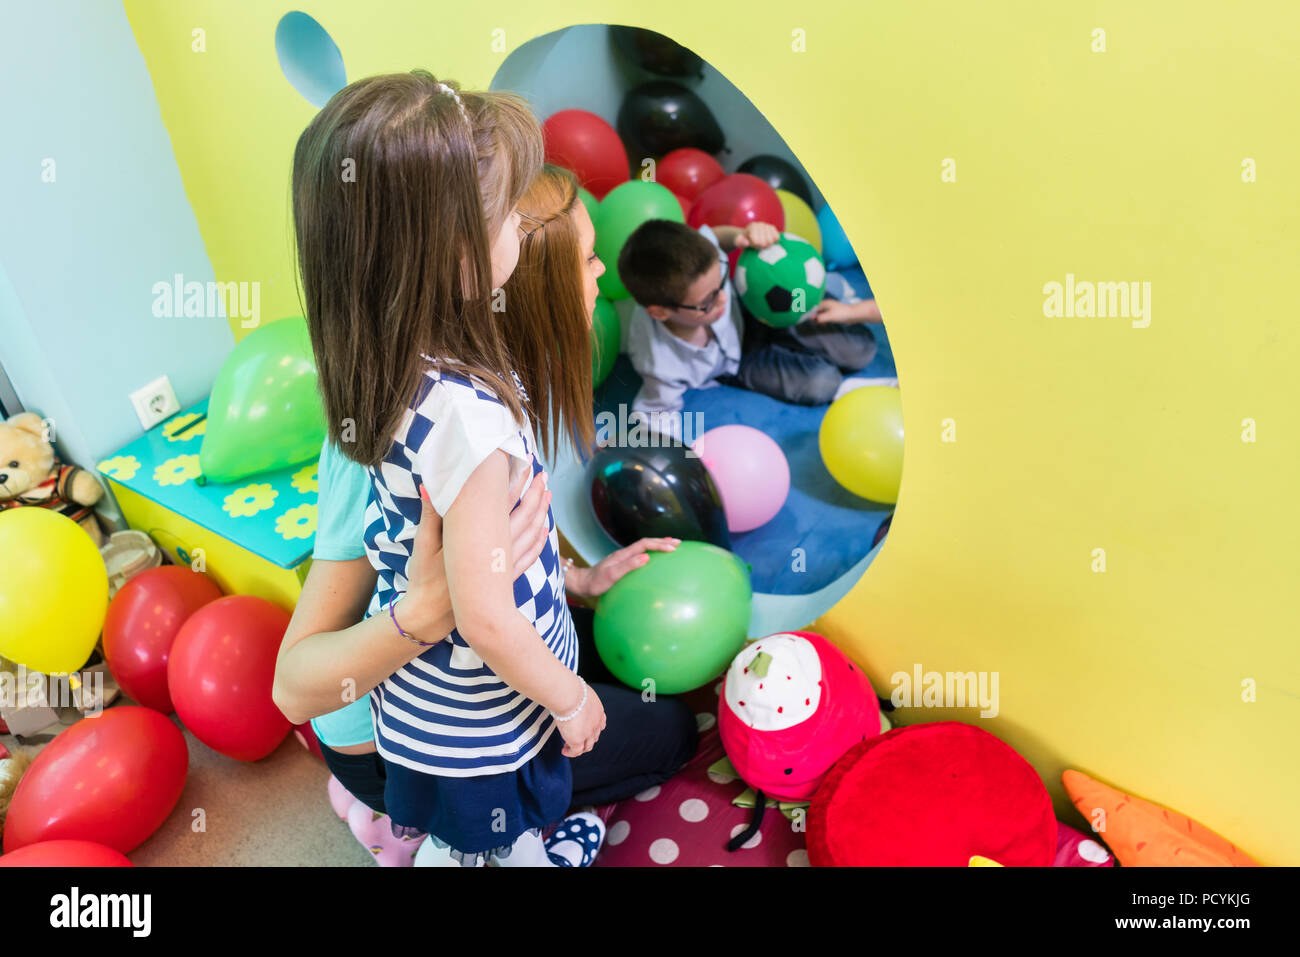 Caring teacher guiding a shy pre-school girl during playtime Stock Photo